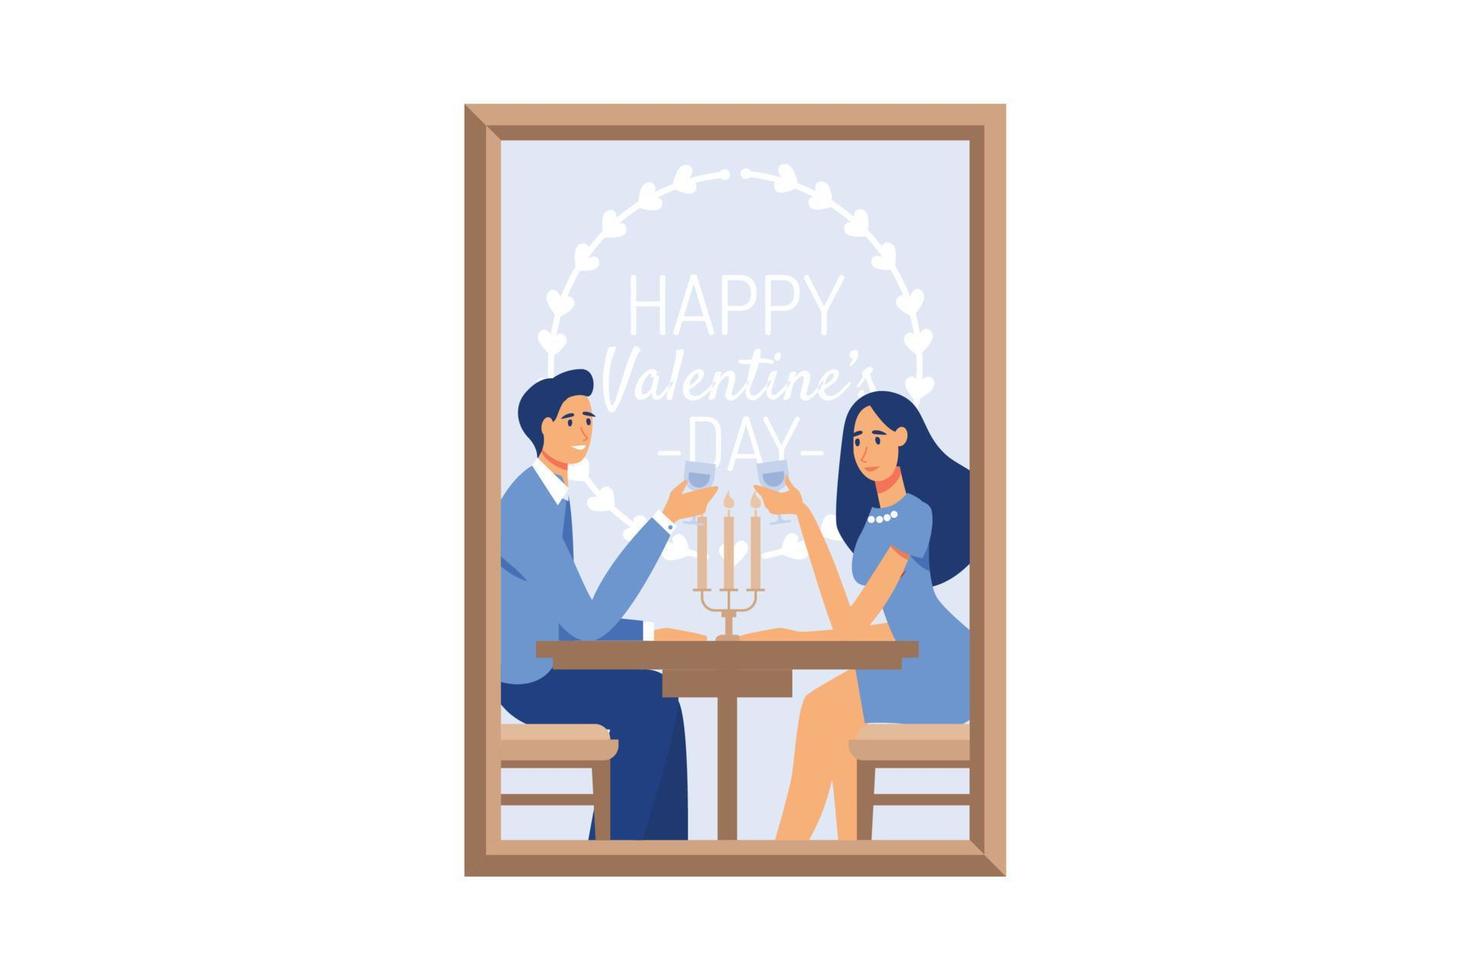 couple in love. Happy Valentine's Day. February 14 is the day of all lovers. graphics suitable for decorating posters, brochures, postcards, flyers flat vector illustration